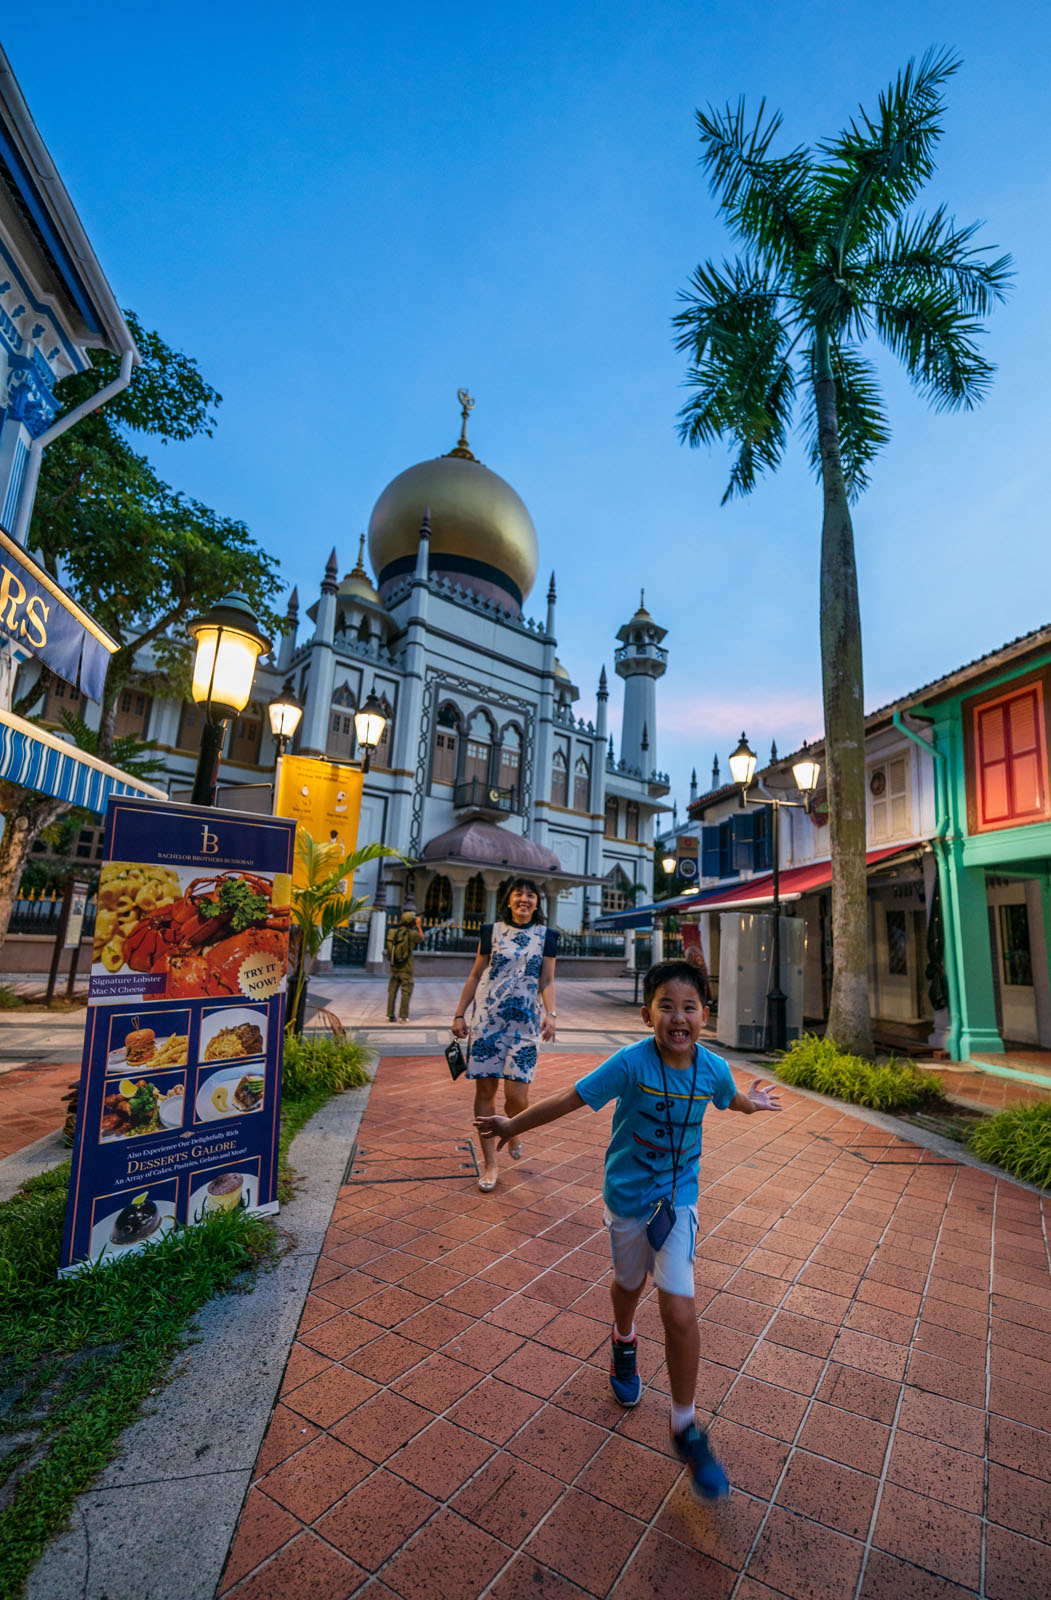 Sultan Mosque, Singapore, July 2021